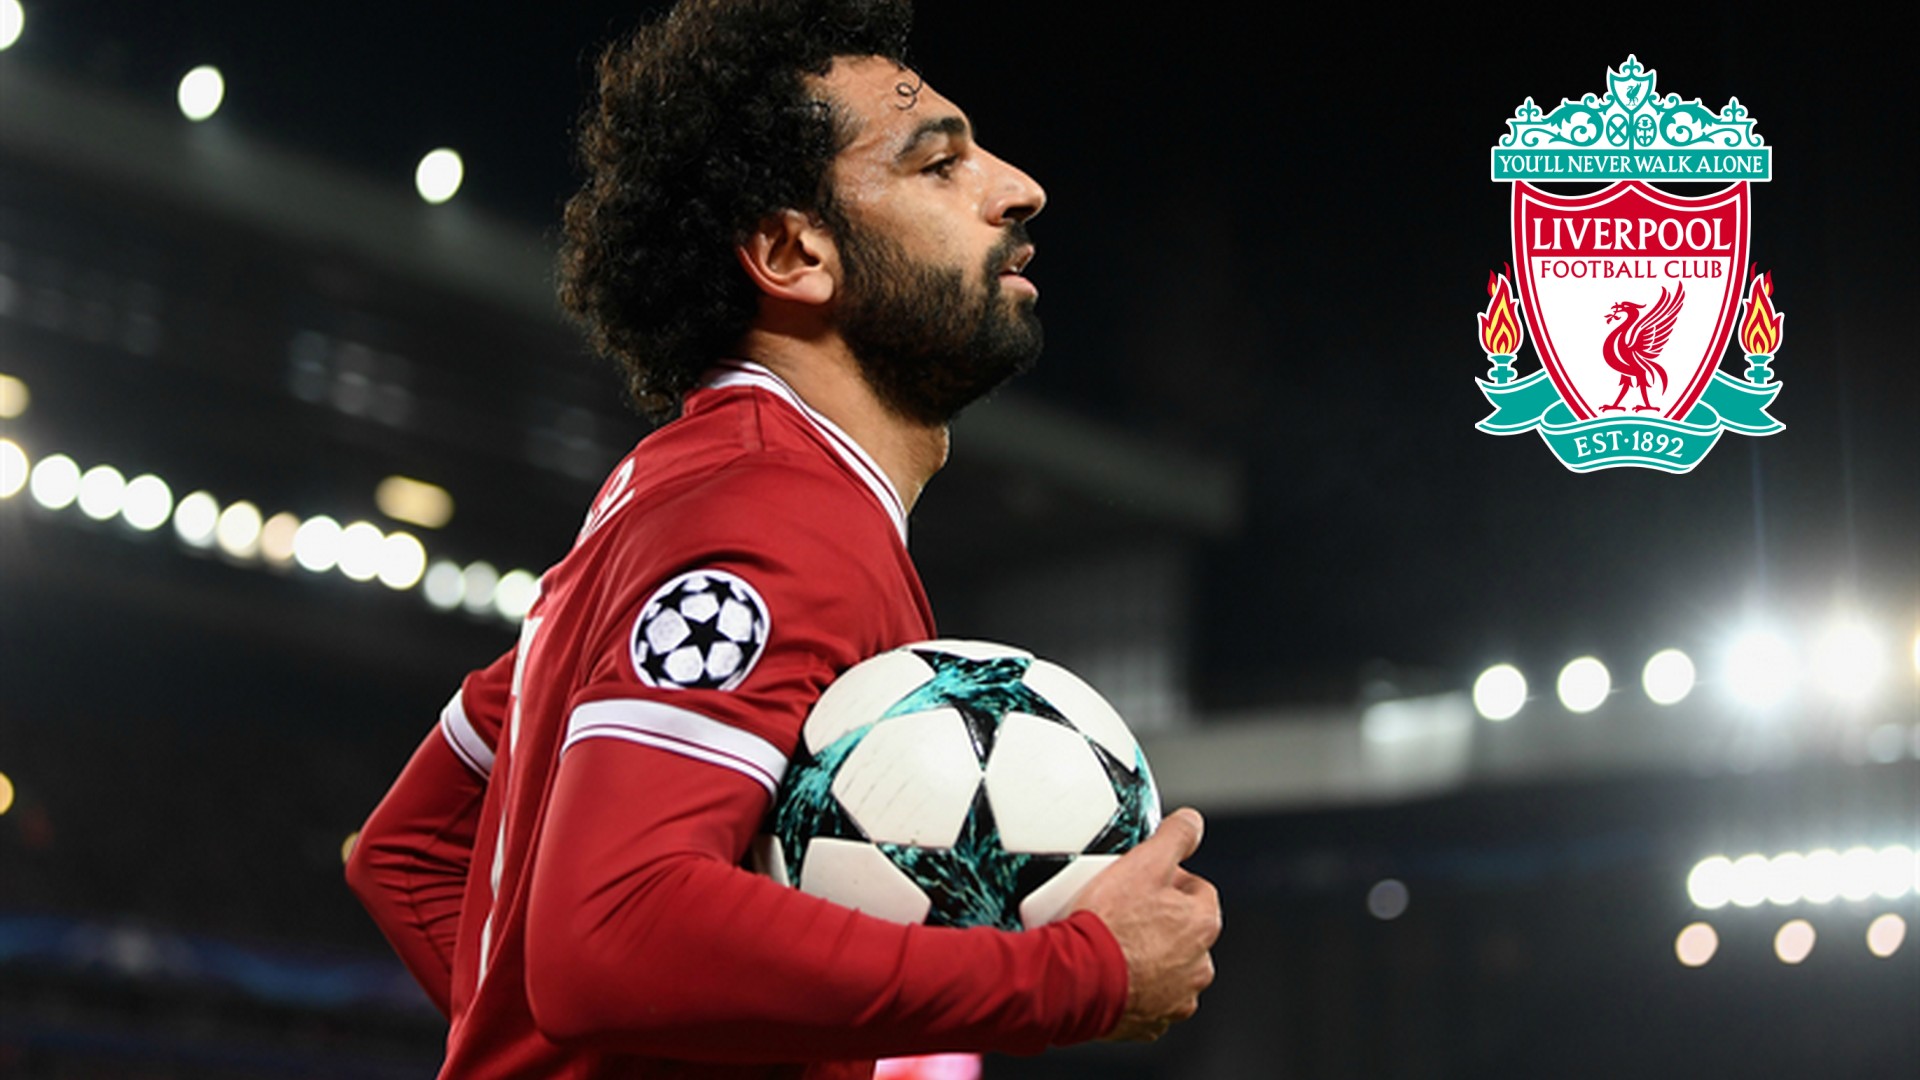 Wallpaper Liverpool Mohamed Salah HD with image resolution 1920x1080 pixel. You can make this wallpaper for your Desktop Computer Backgrounds, Mac Wallpapers, Android Lock screen or iPhone Screensavers